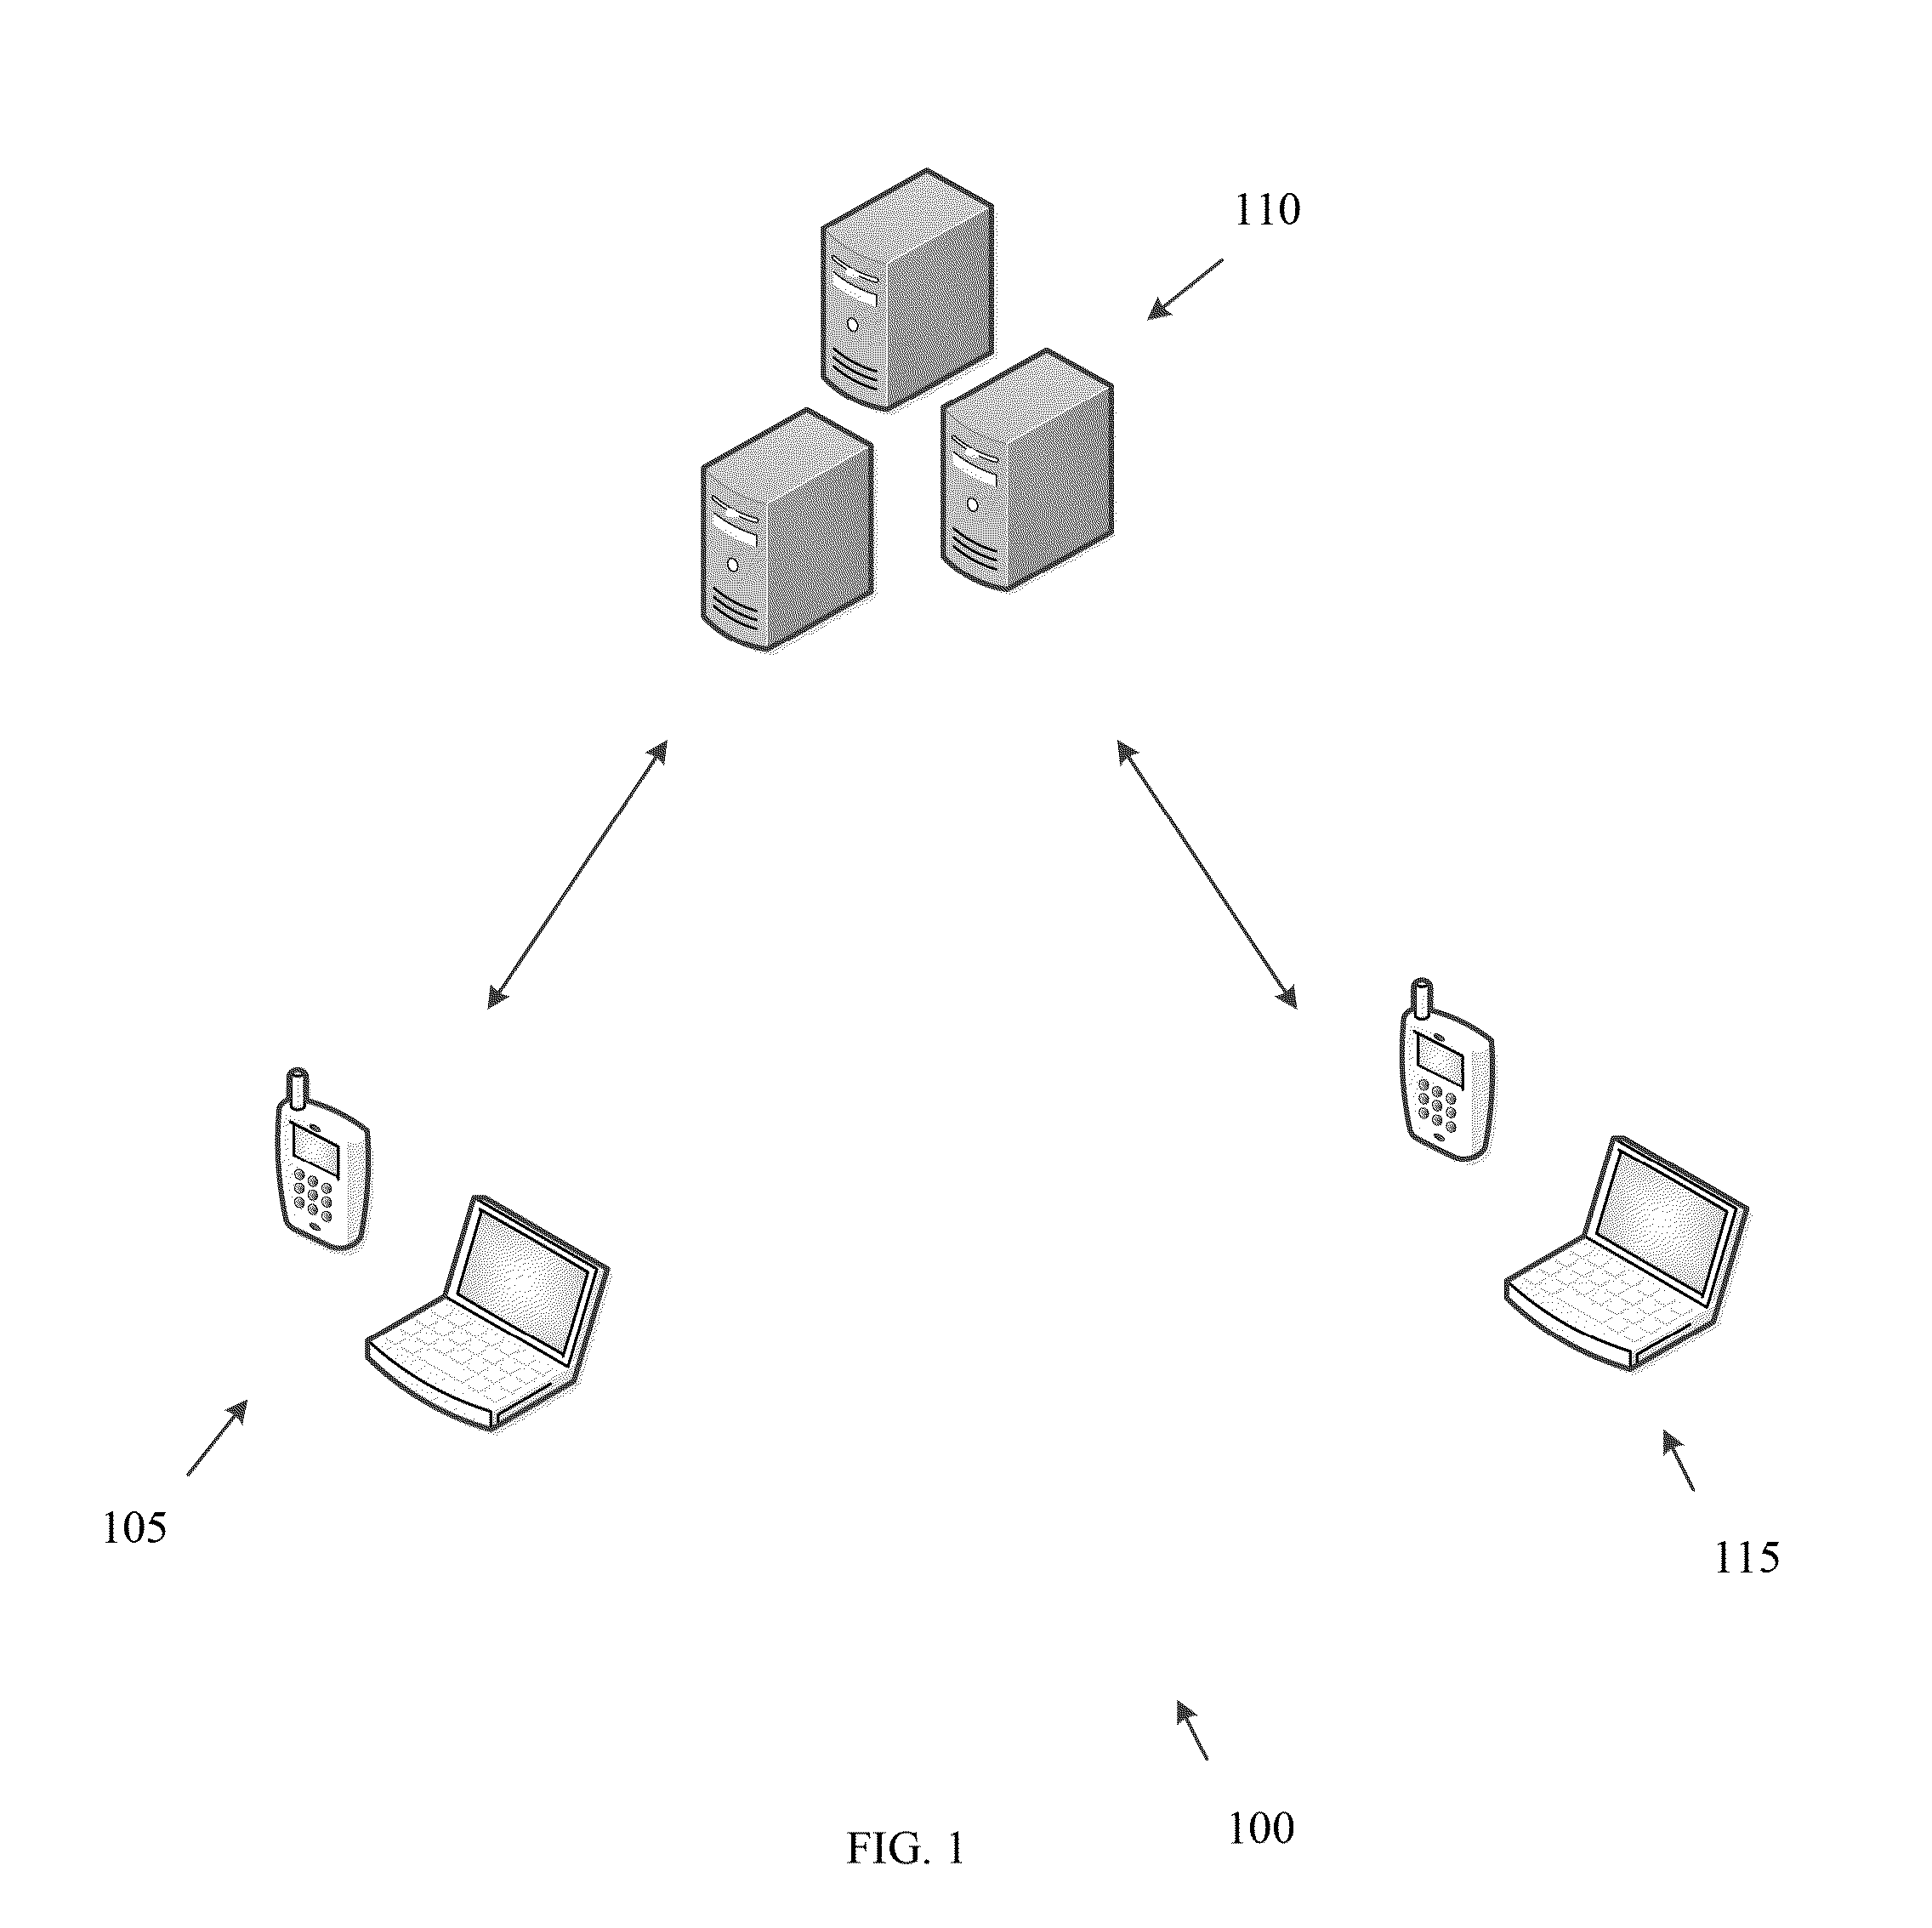 Method, System and Program Product for Transferring Genetic and Health Data